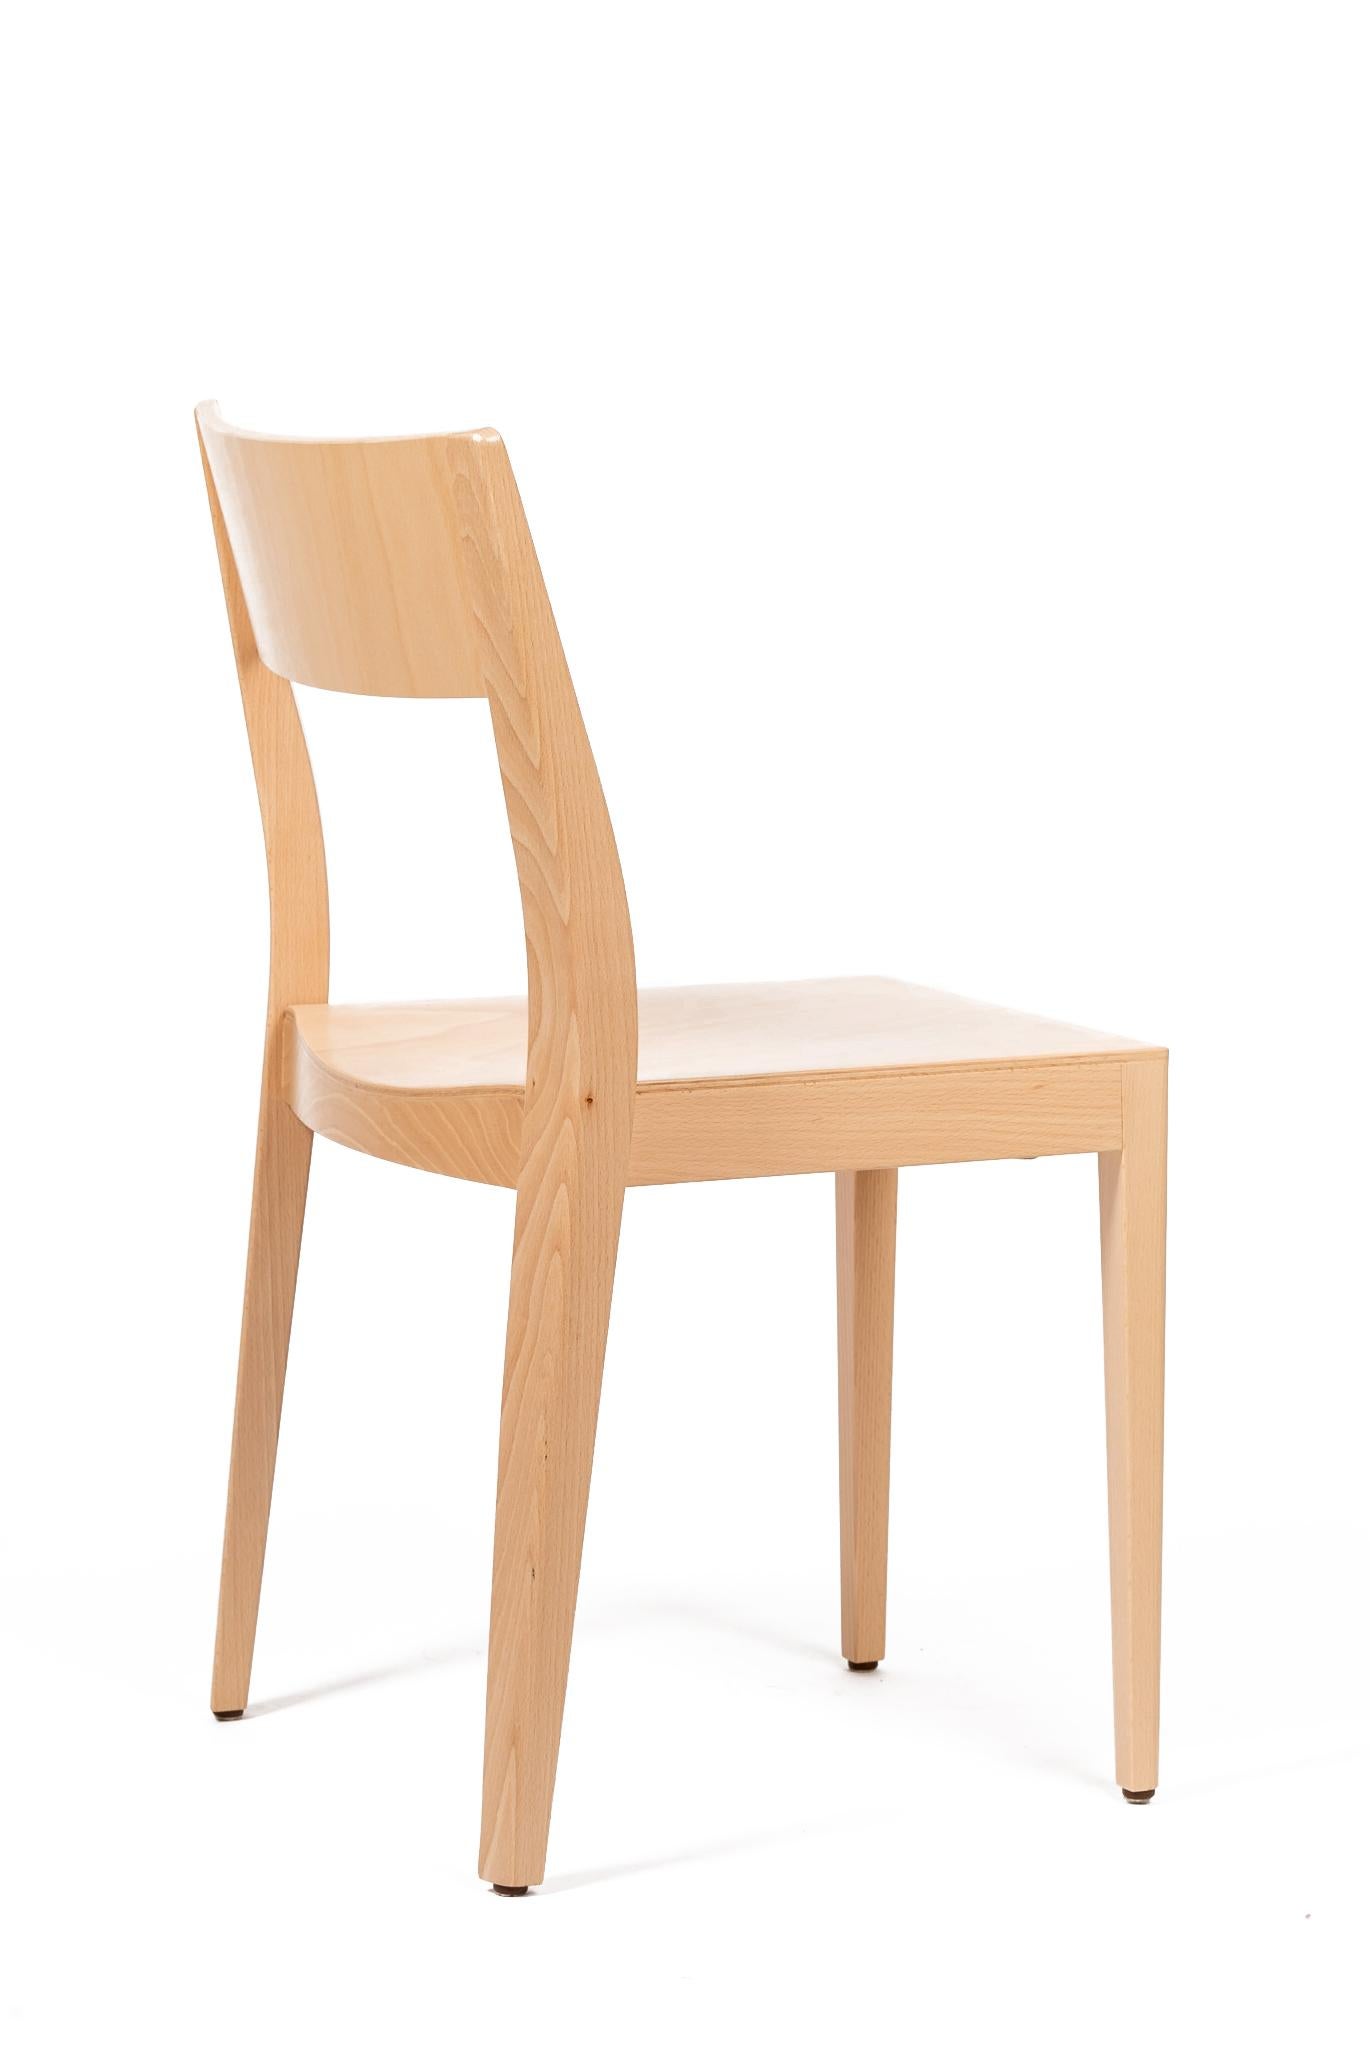 The wooden chair family Soma is based on a clear design and offers an ideal seating solution for dining rooms.

Designed by Thomas Albrecht in 2004.

Dietiker SOMA chair
Construction: Traditional chair frame, seat and back in wood
Wood type: